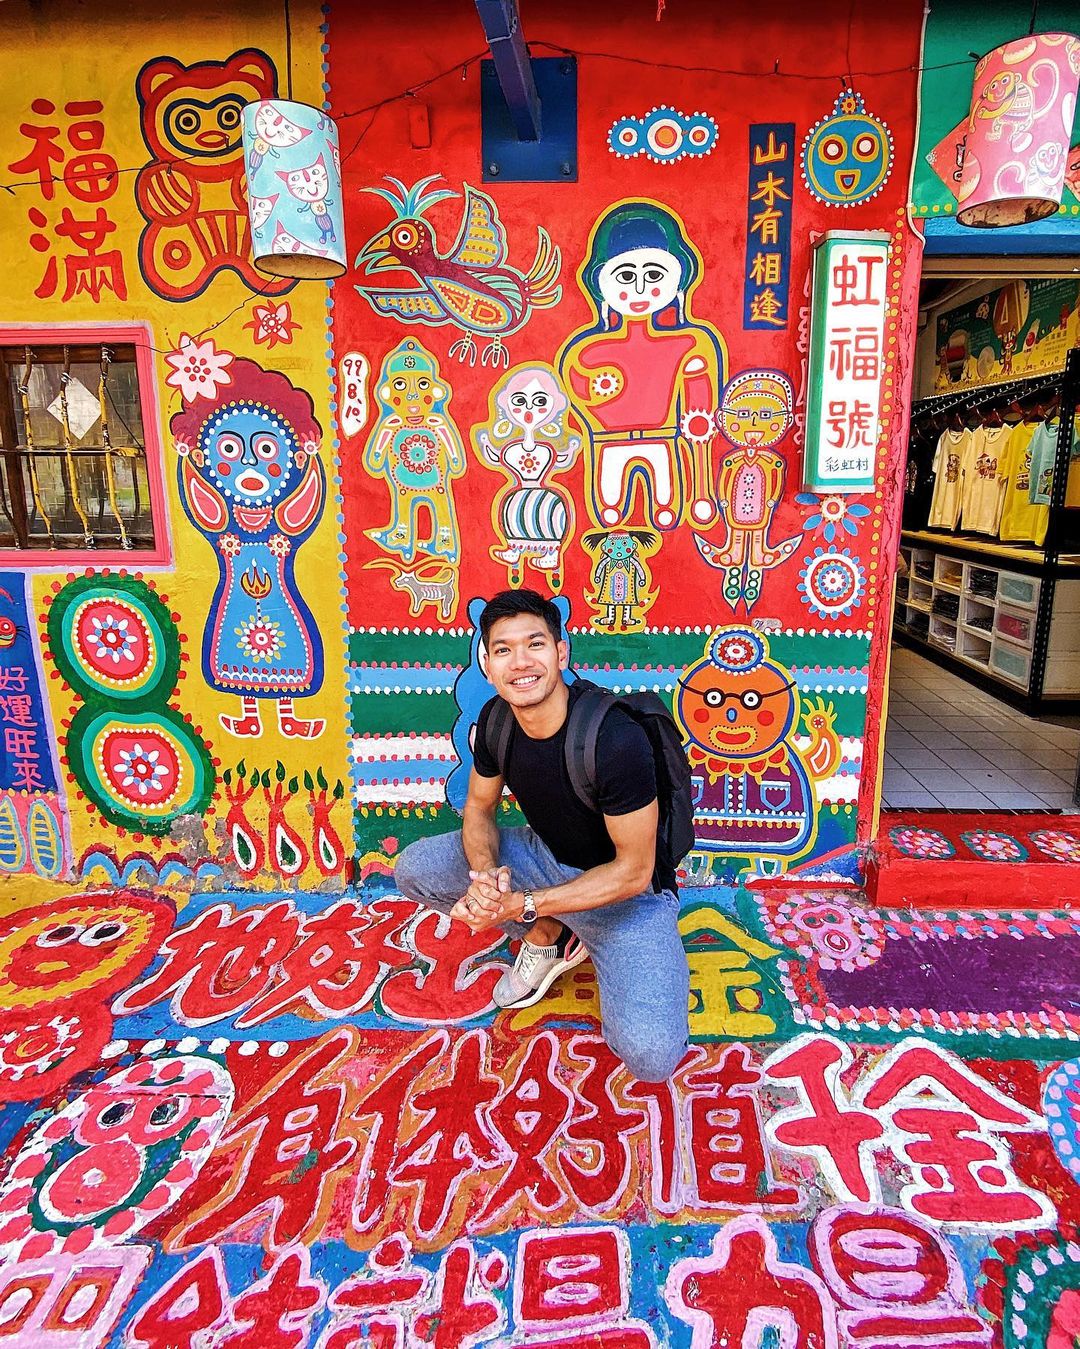 Rainbow Village has become a tourist attraction